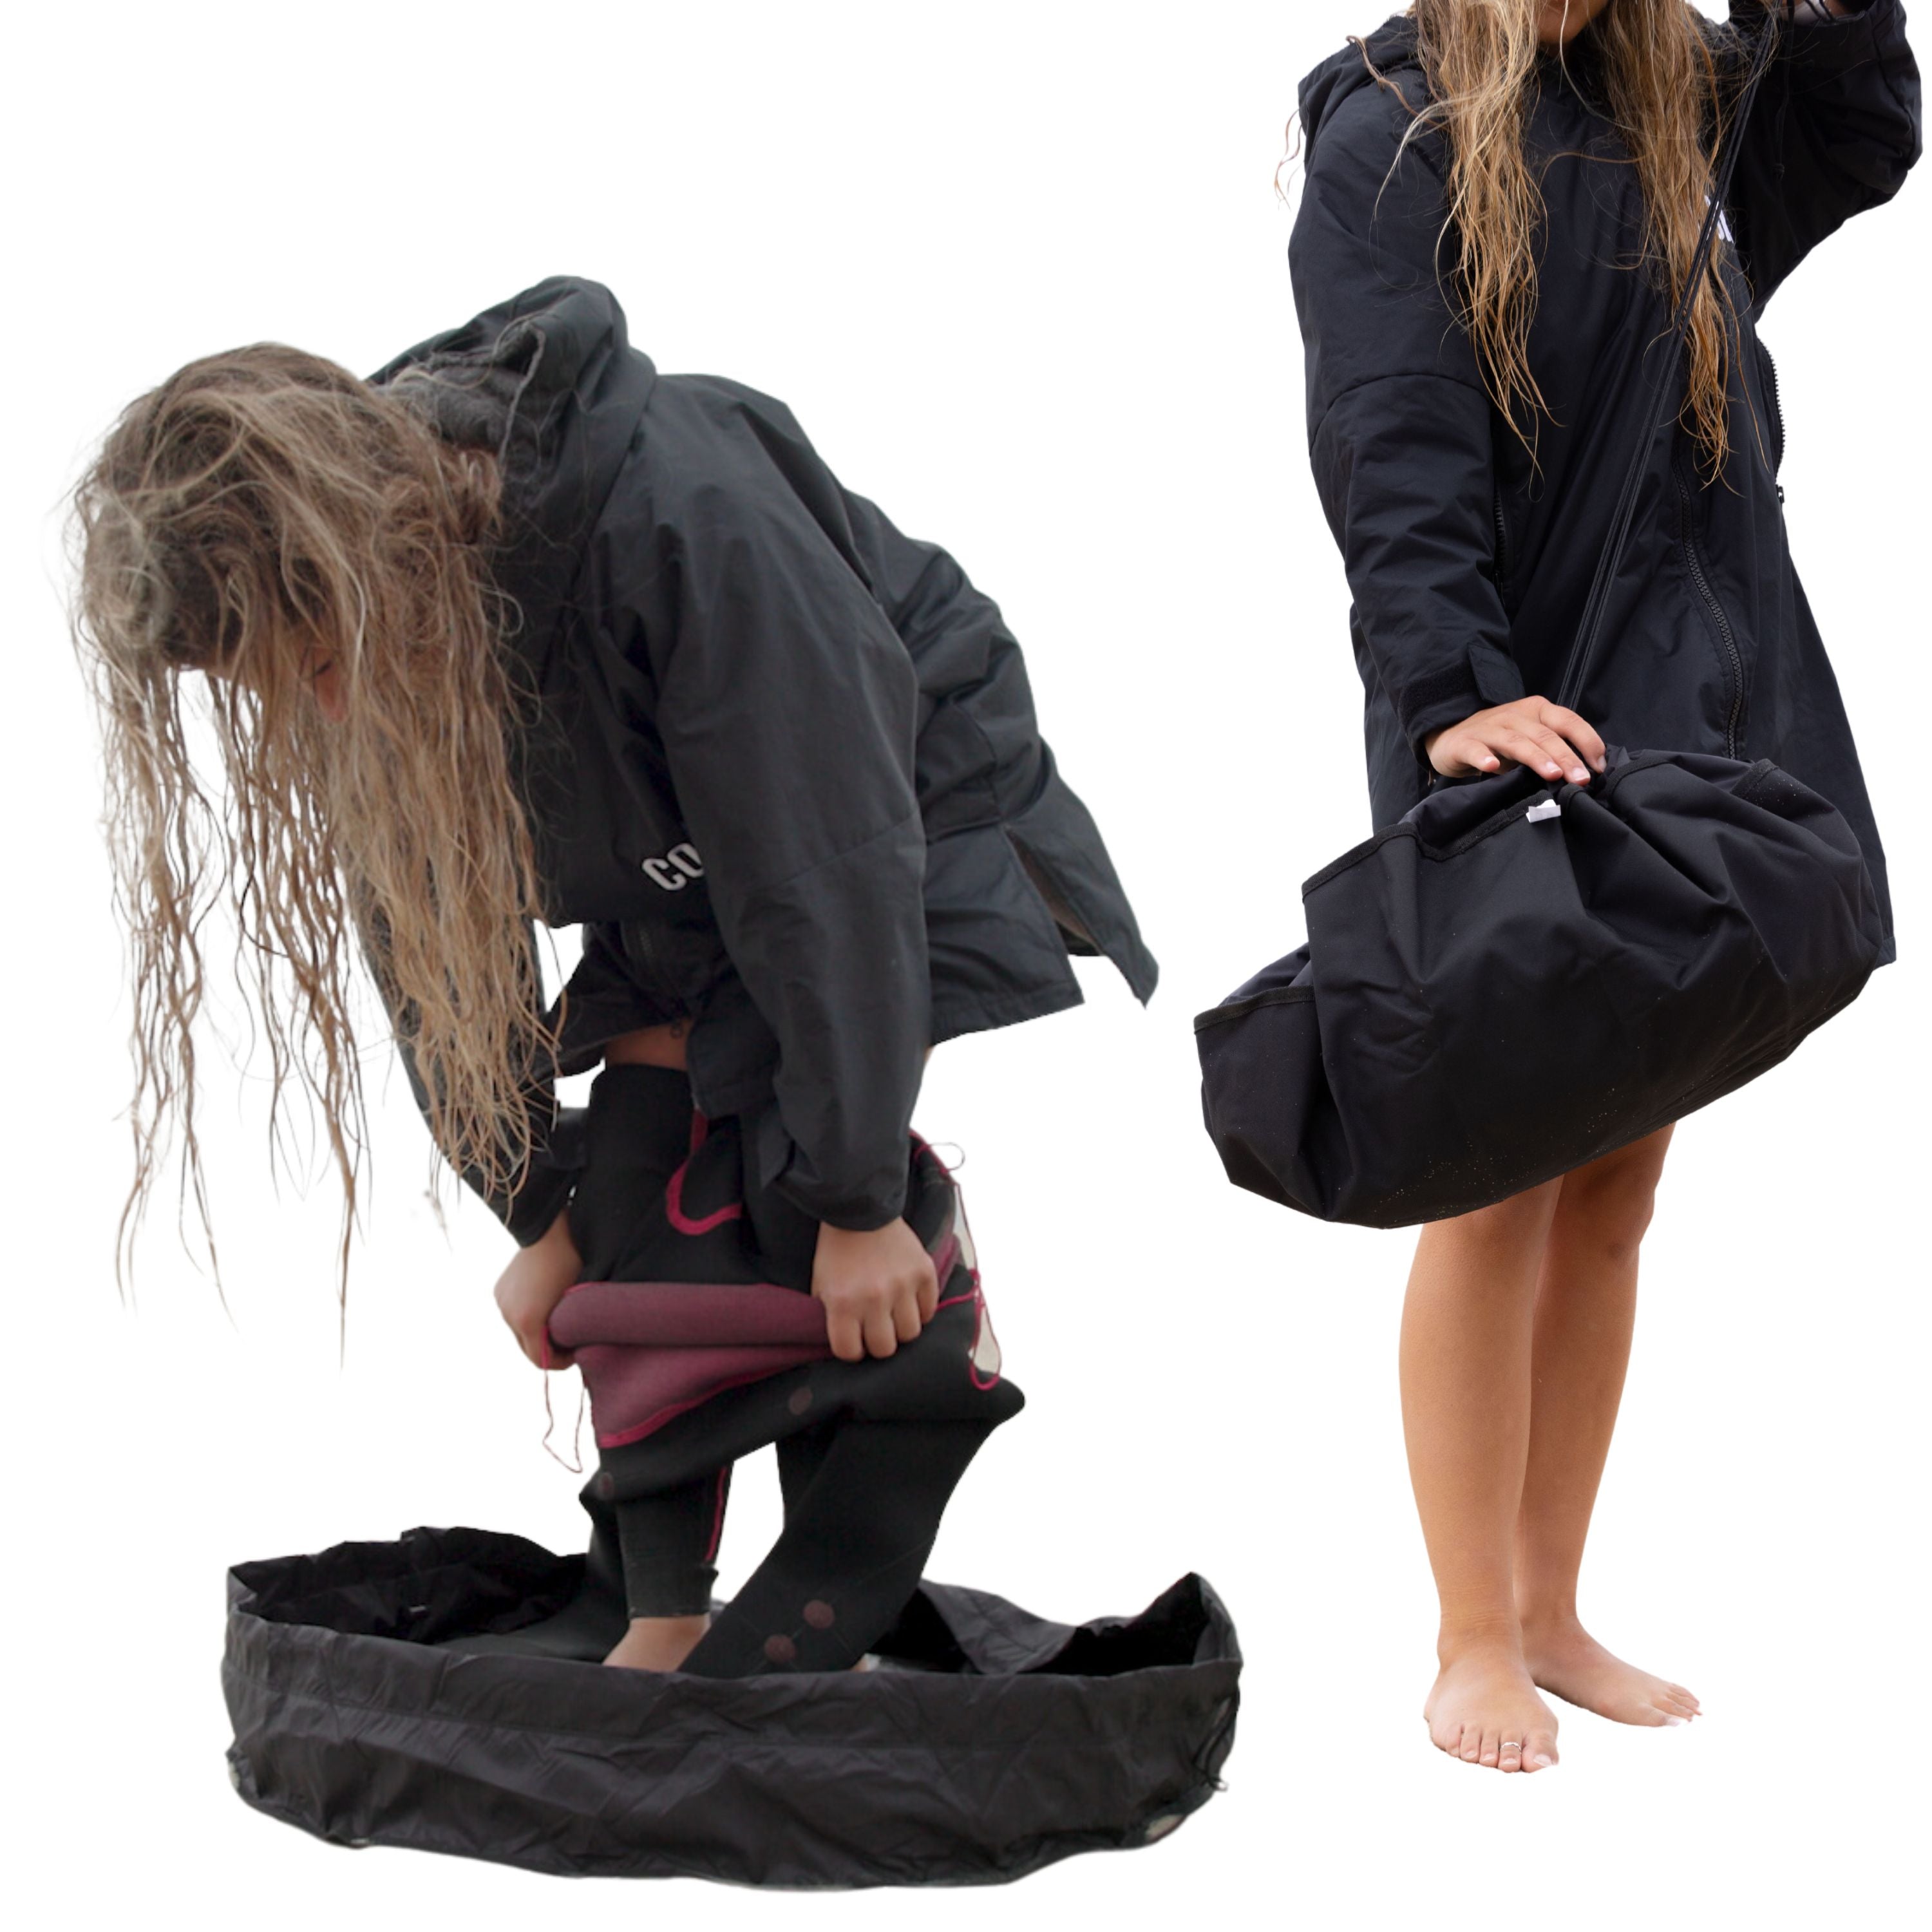 Wetsuit Changing Mat/Bag by COR :B012HAXL2Y:海外輸入専門のHiroshop